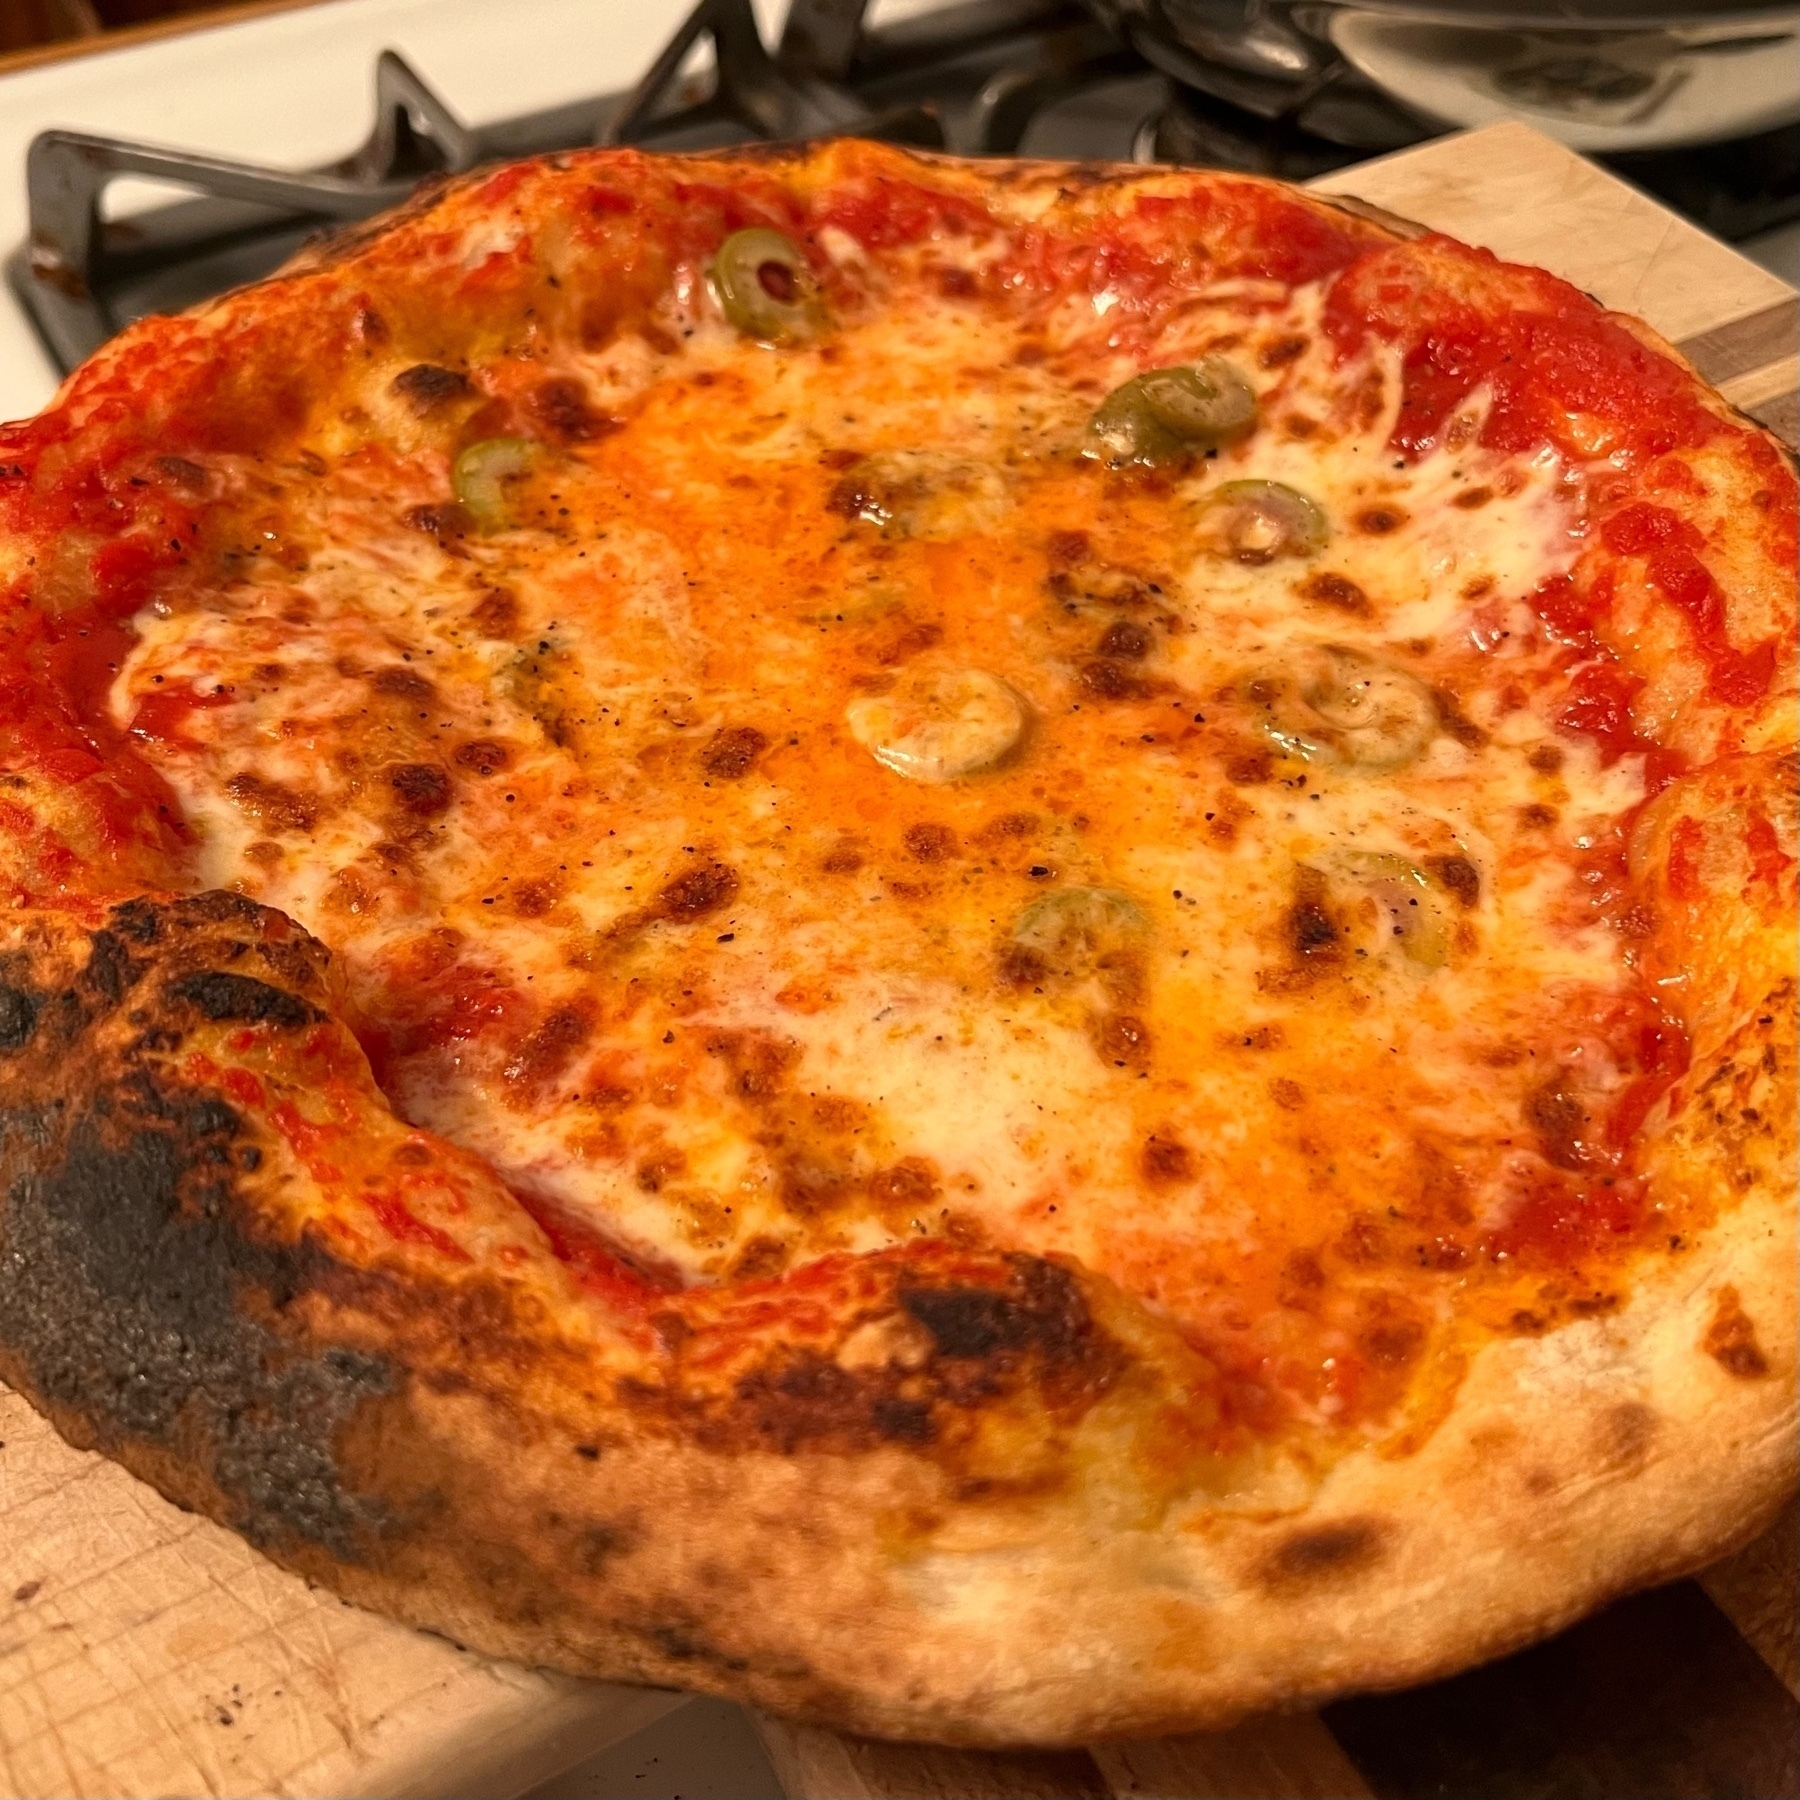 Cooked pizza with puffy edges